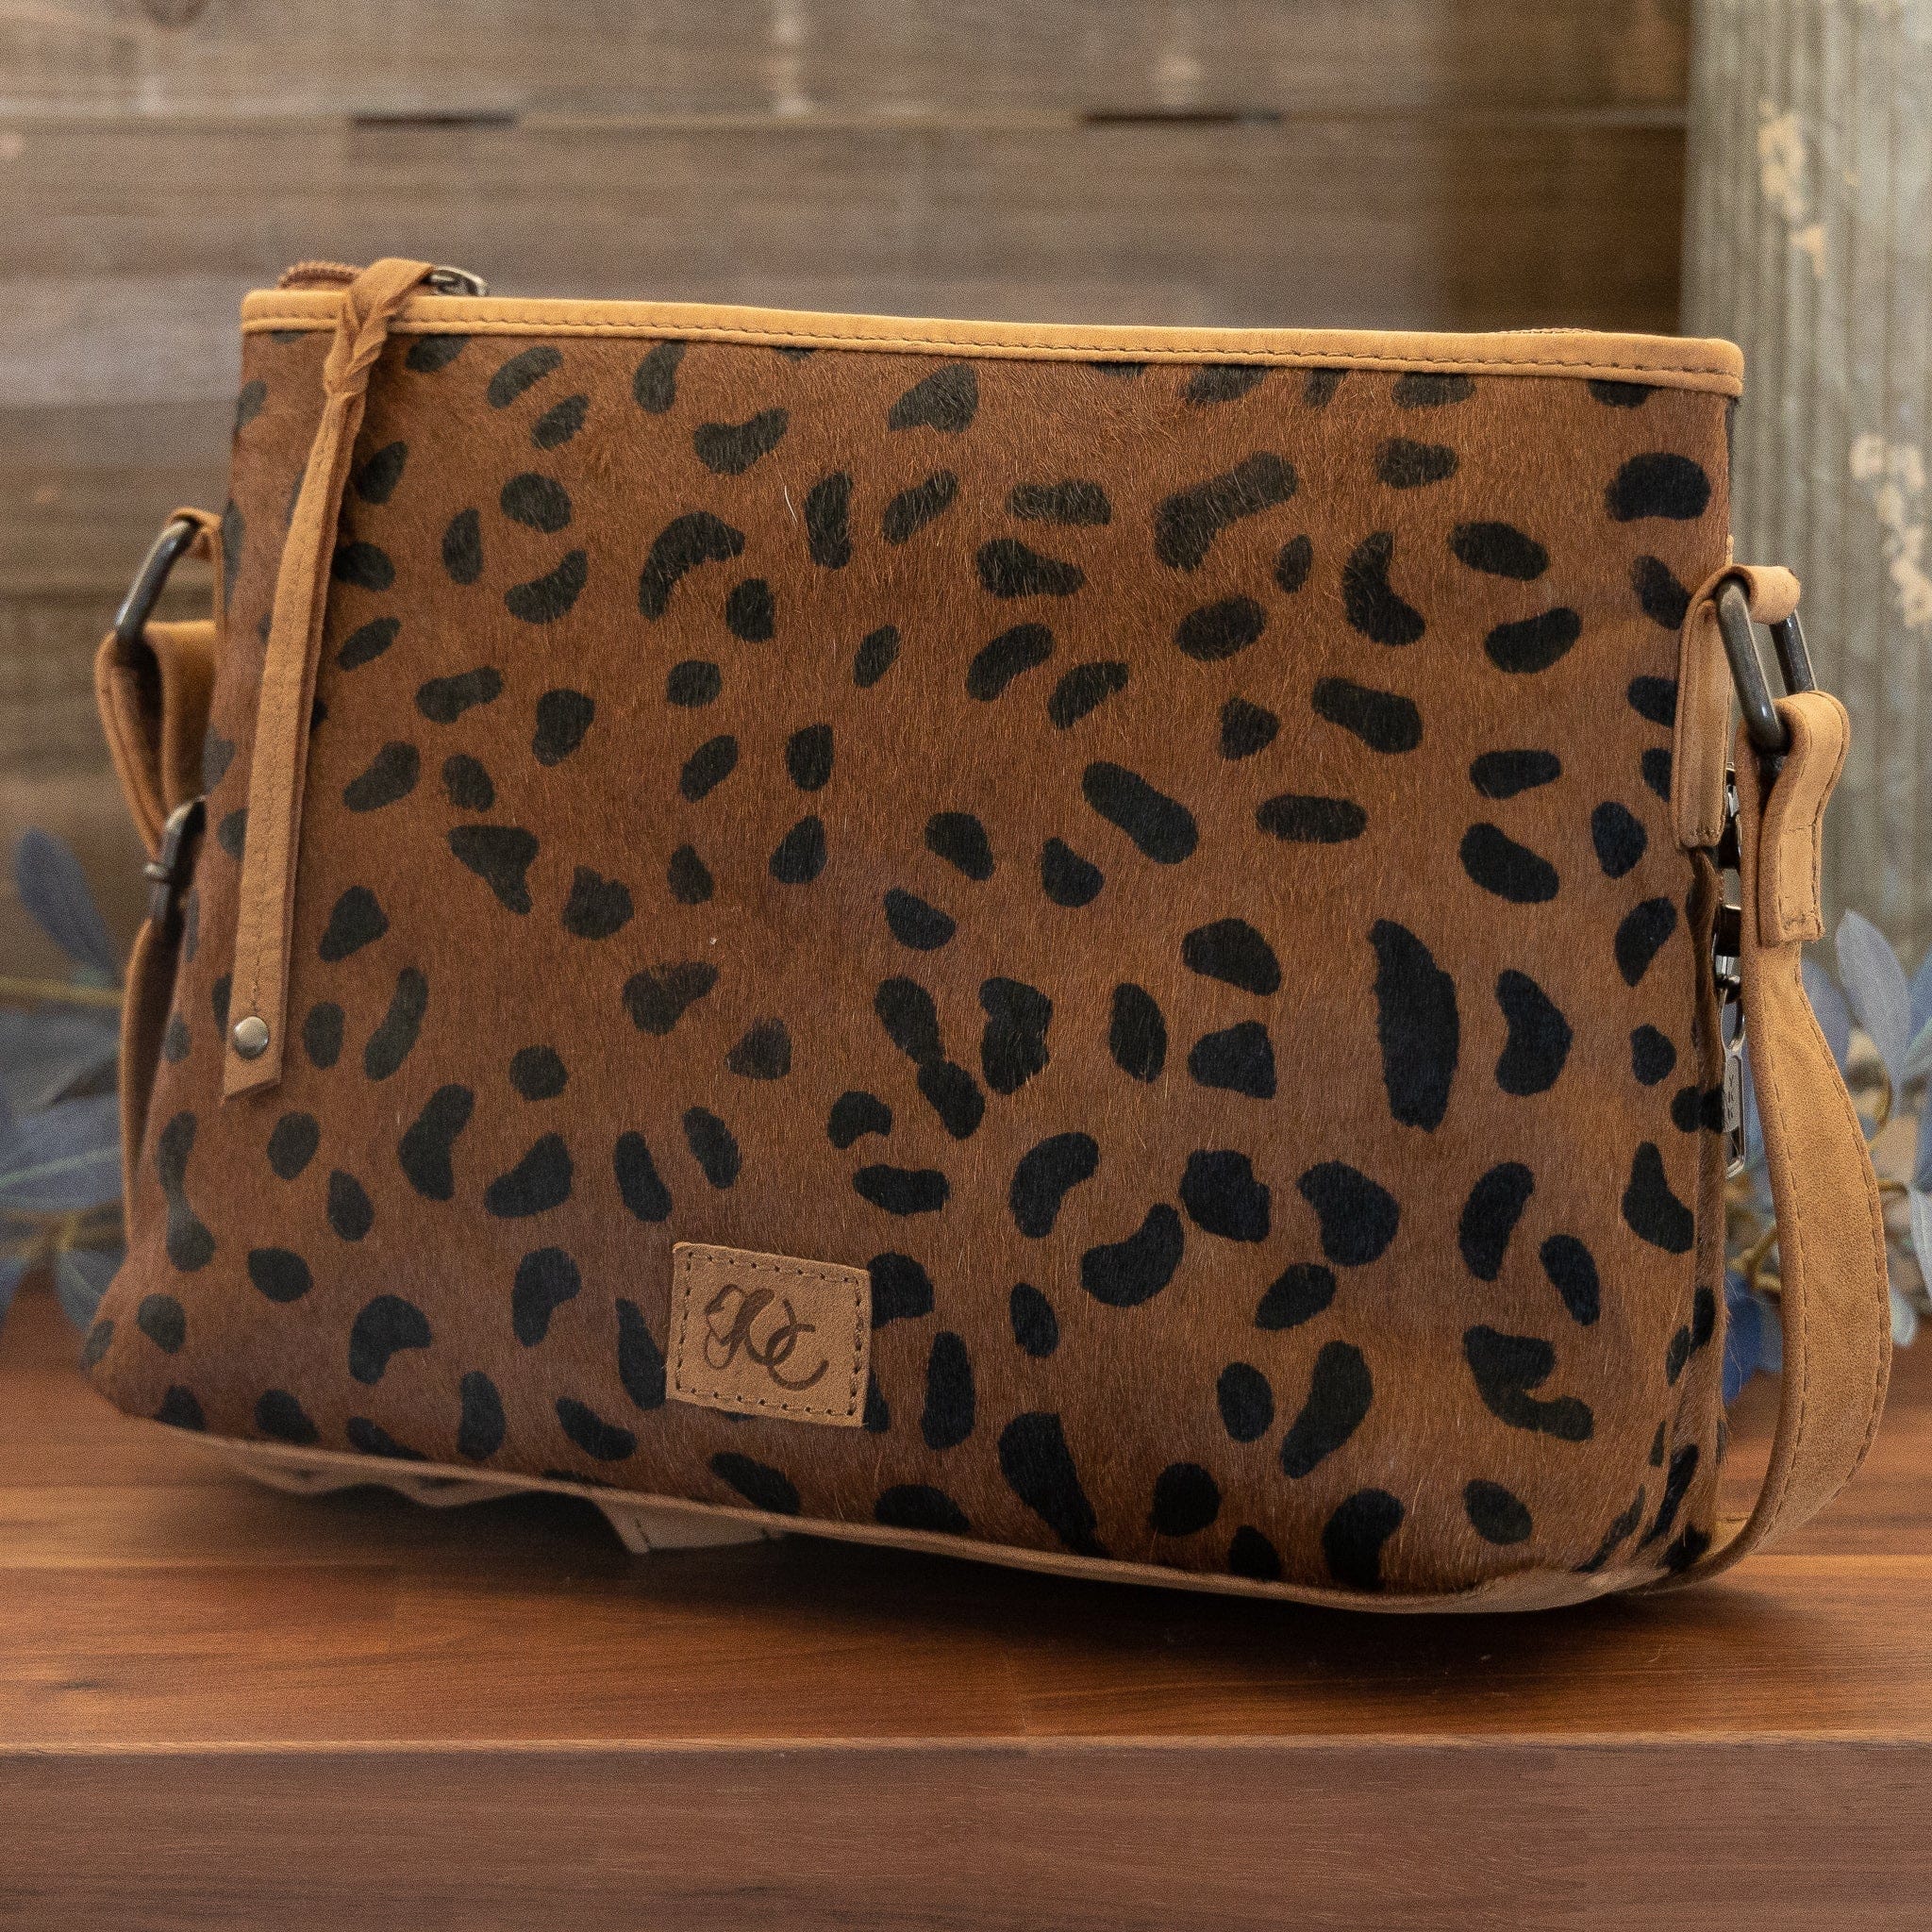 The Casual Crossbody in Classic Leopard, Bags & Accessories